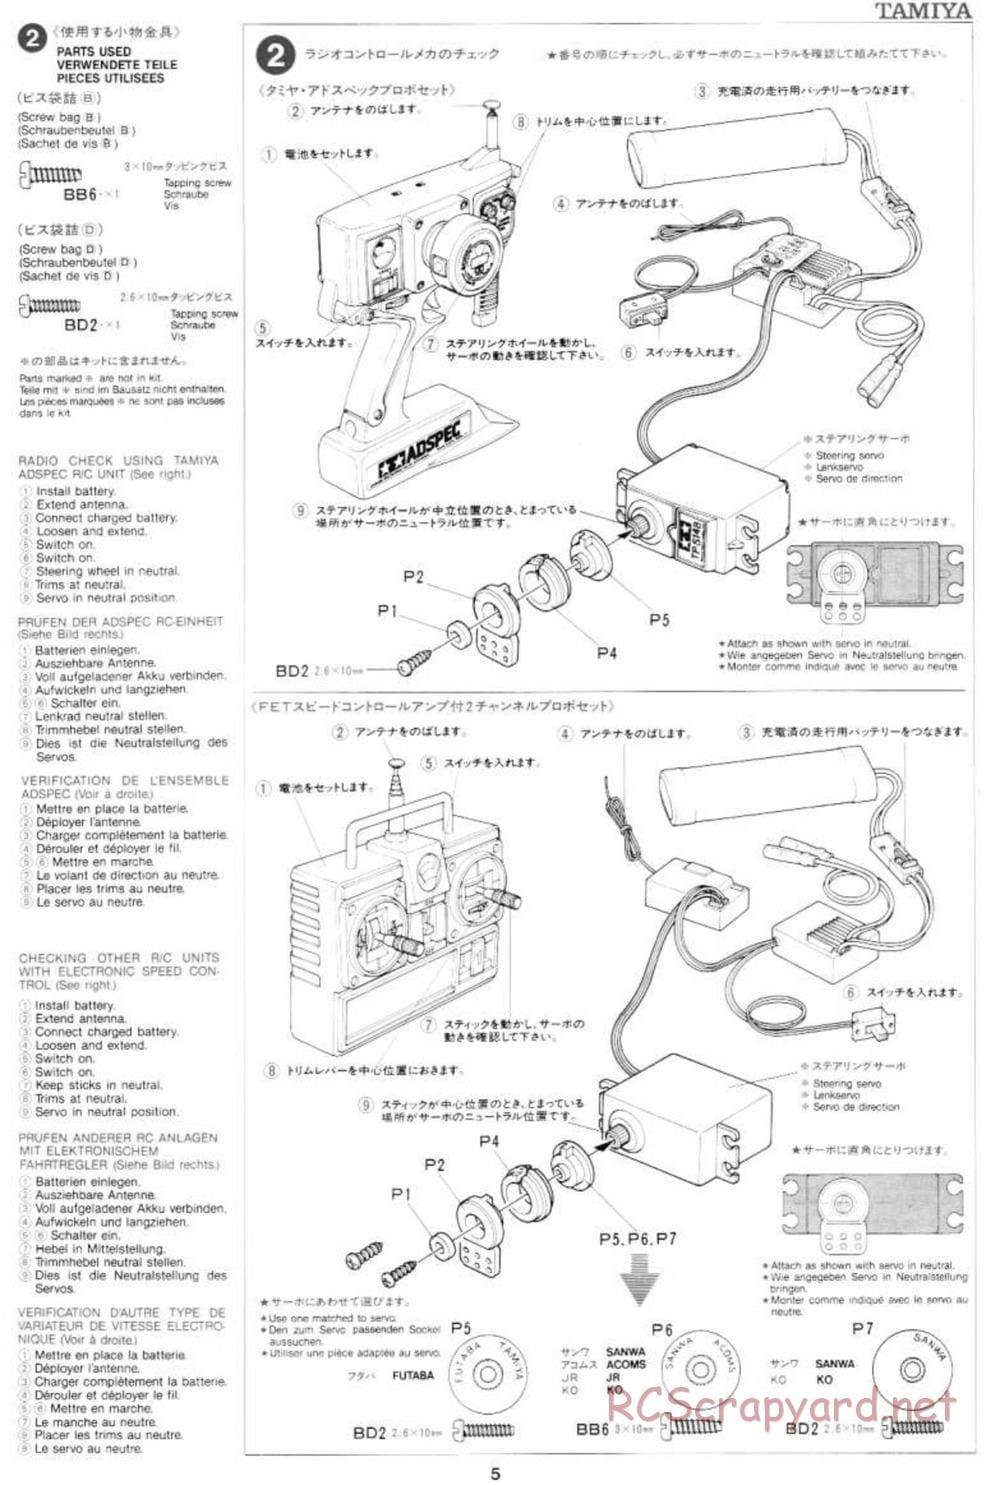 Tamiya - Mercedes-Benz C11 - Group-C Chassis - Manual - Page 5